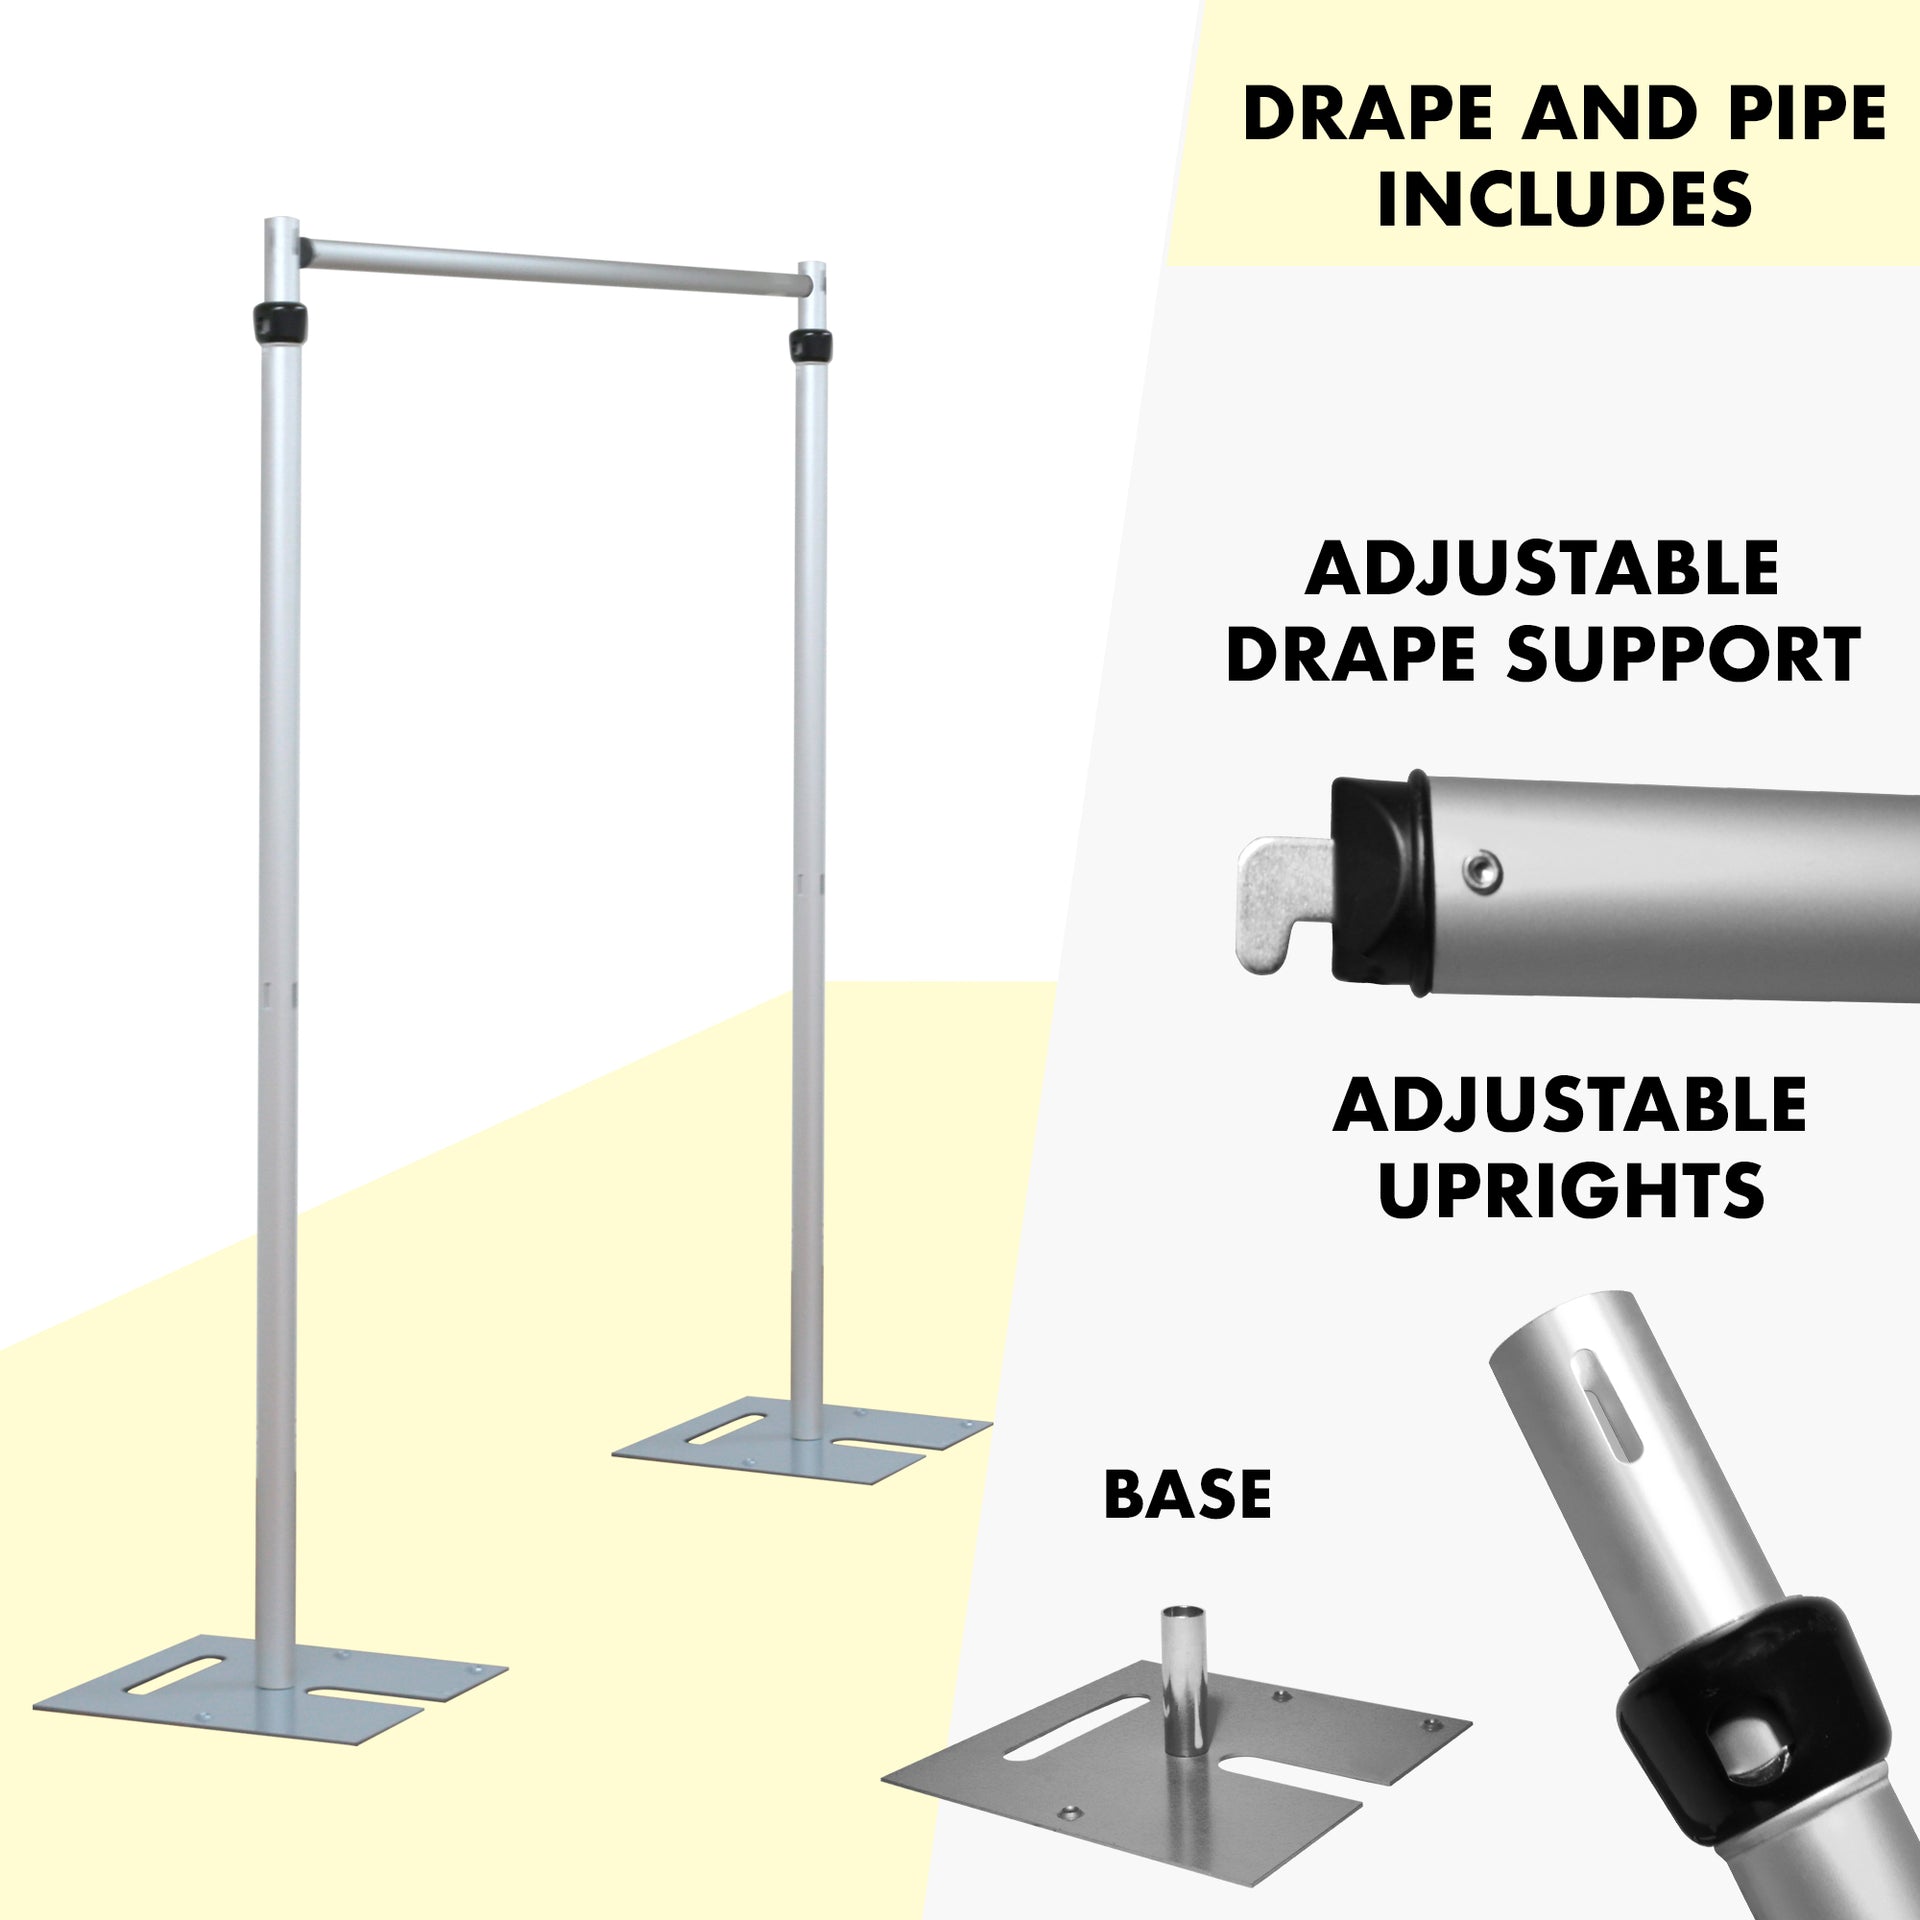 Up to 20'H x 14'W - - Adjustable Heavy Duty Pipe & Drape kit